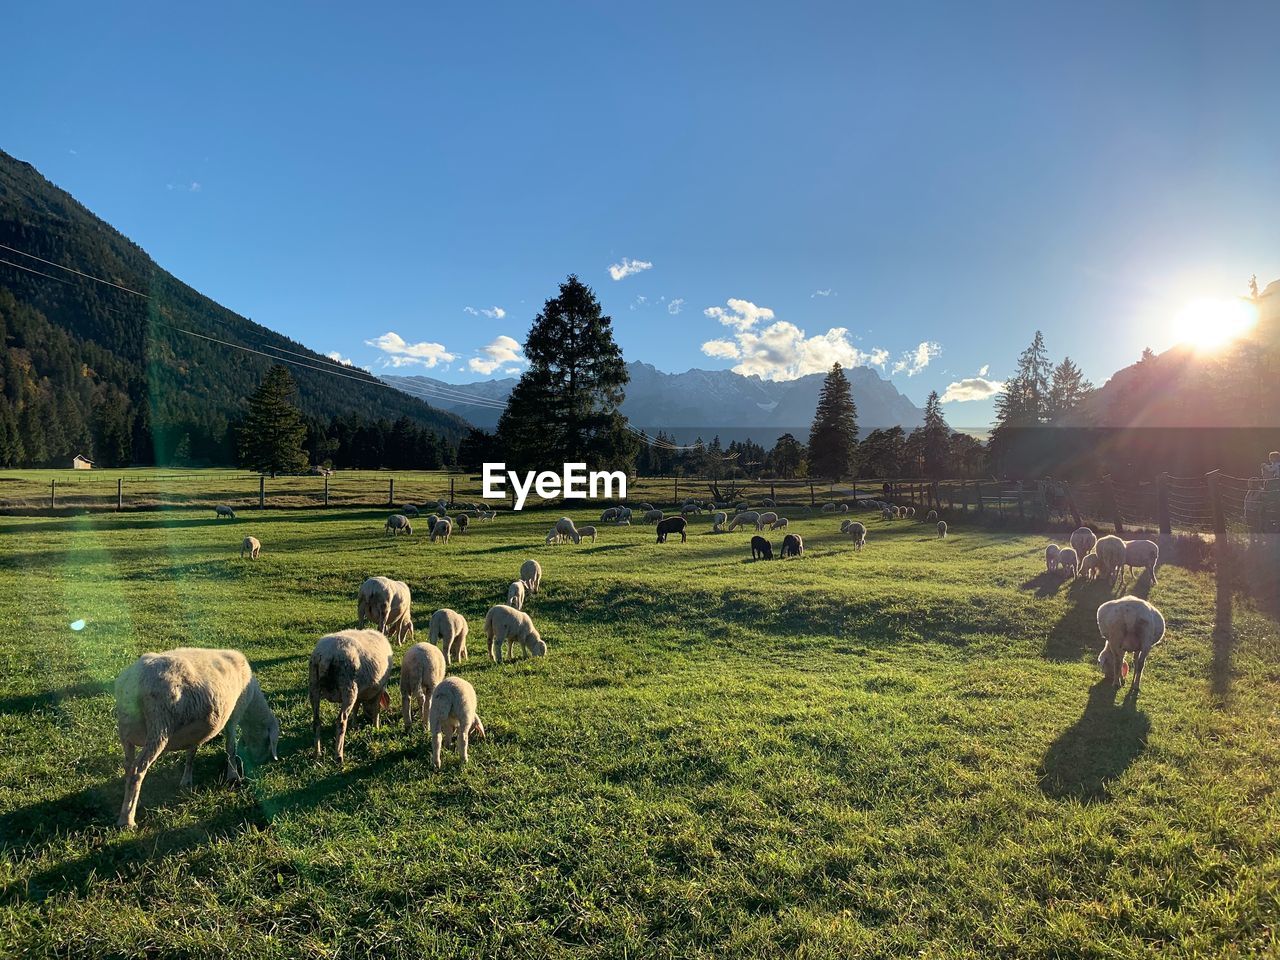 VIEW OF SHEEP GRAZING IN FIELD